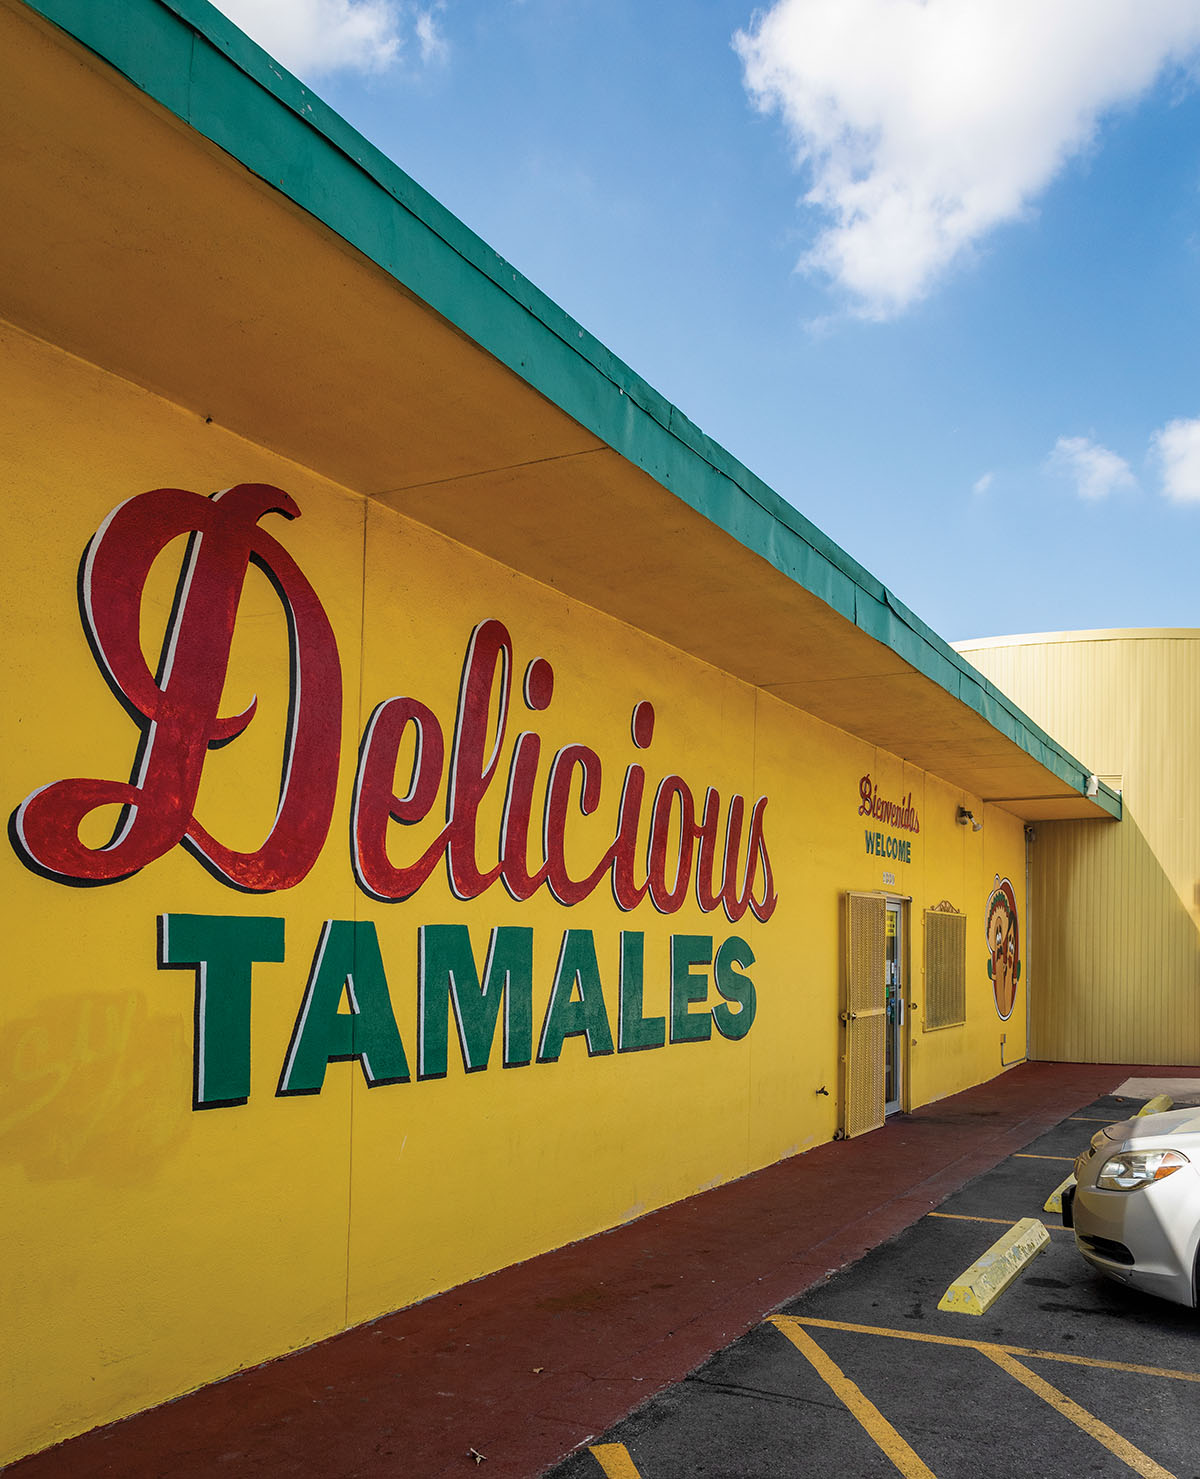 The exterior of a bright yellow building painted to read "Delicious Tamales"